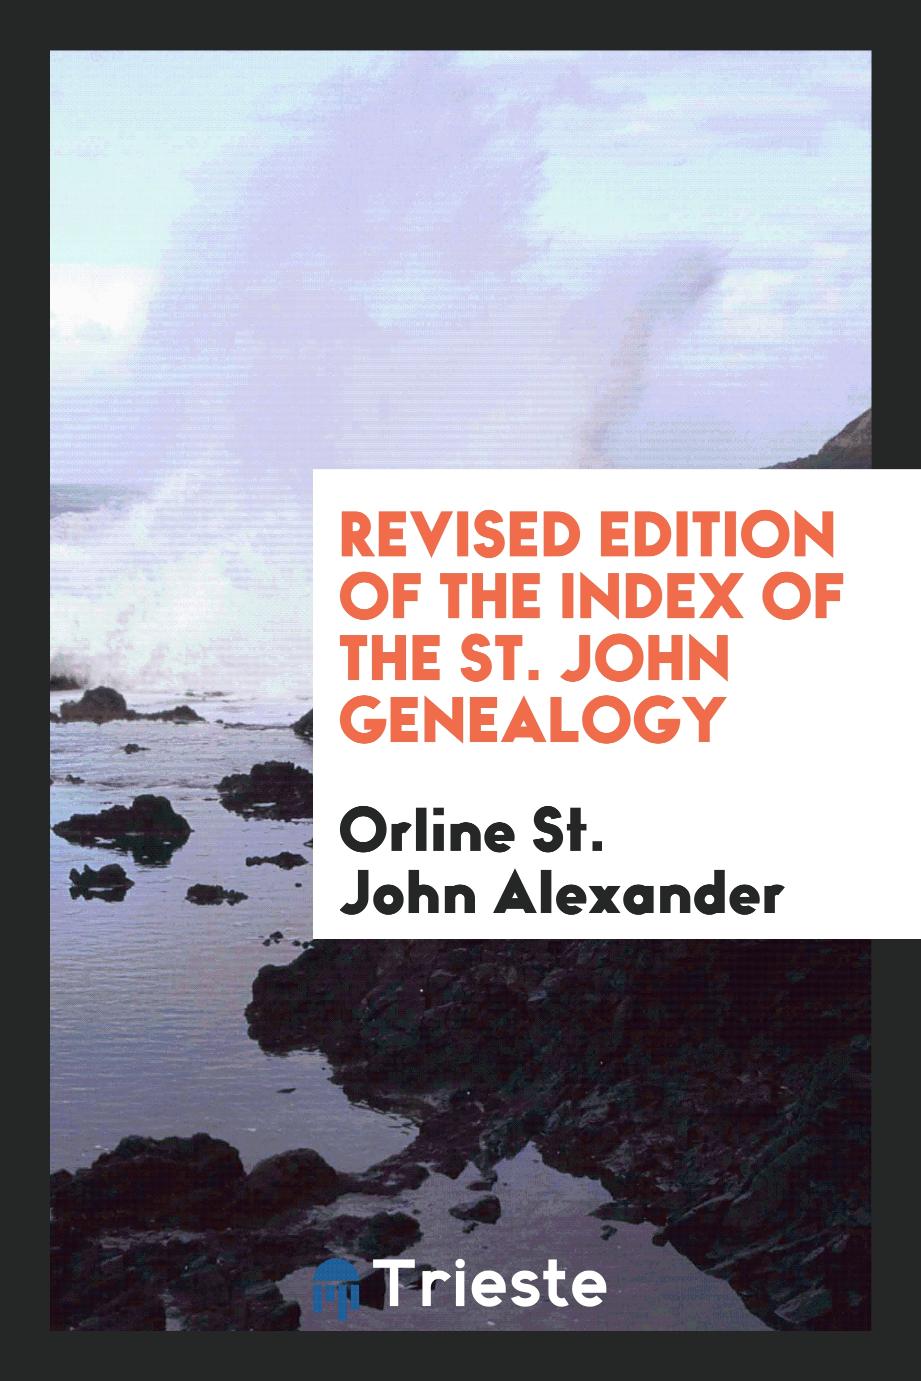 Revised edition of the index of the St. John genealogy